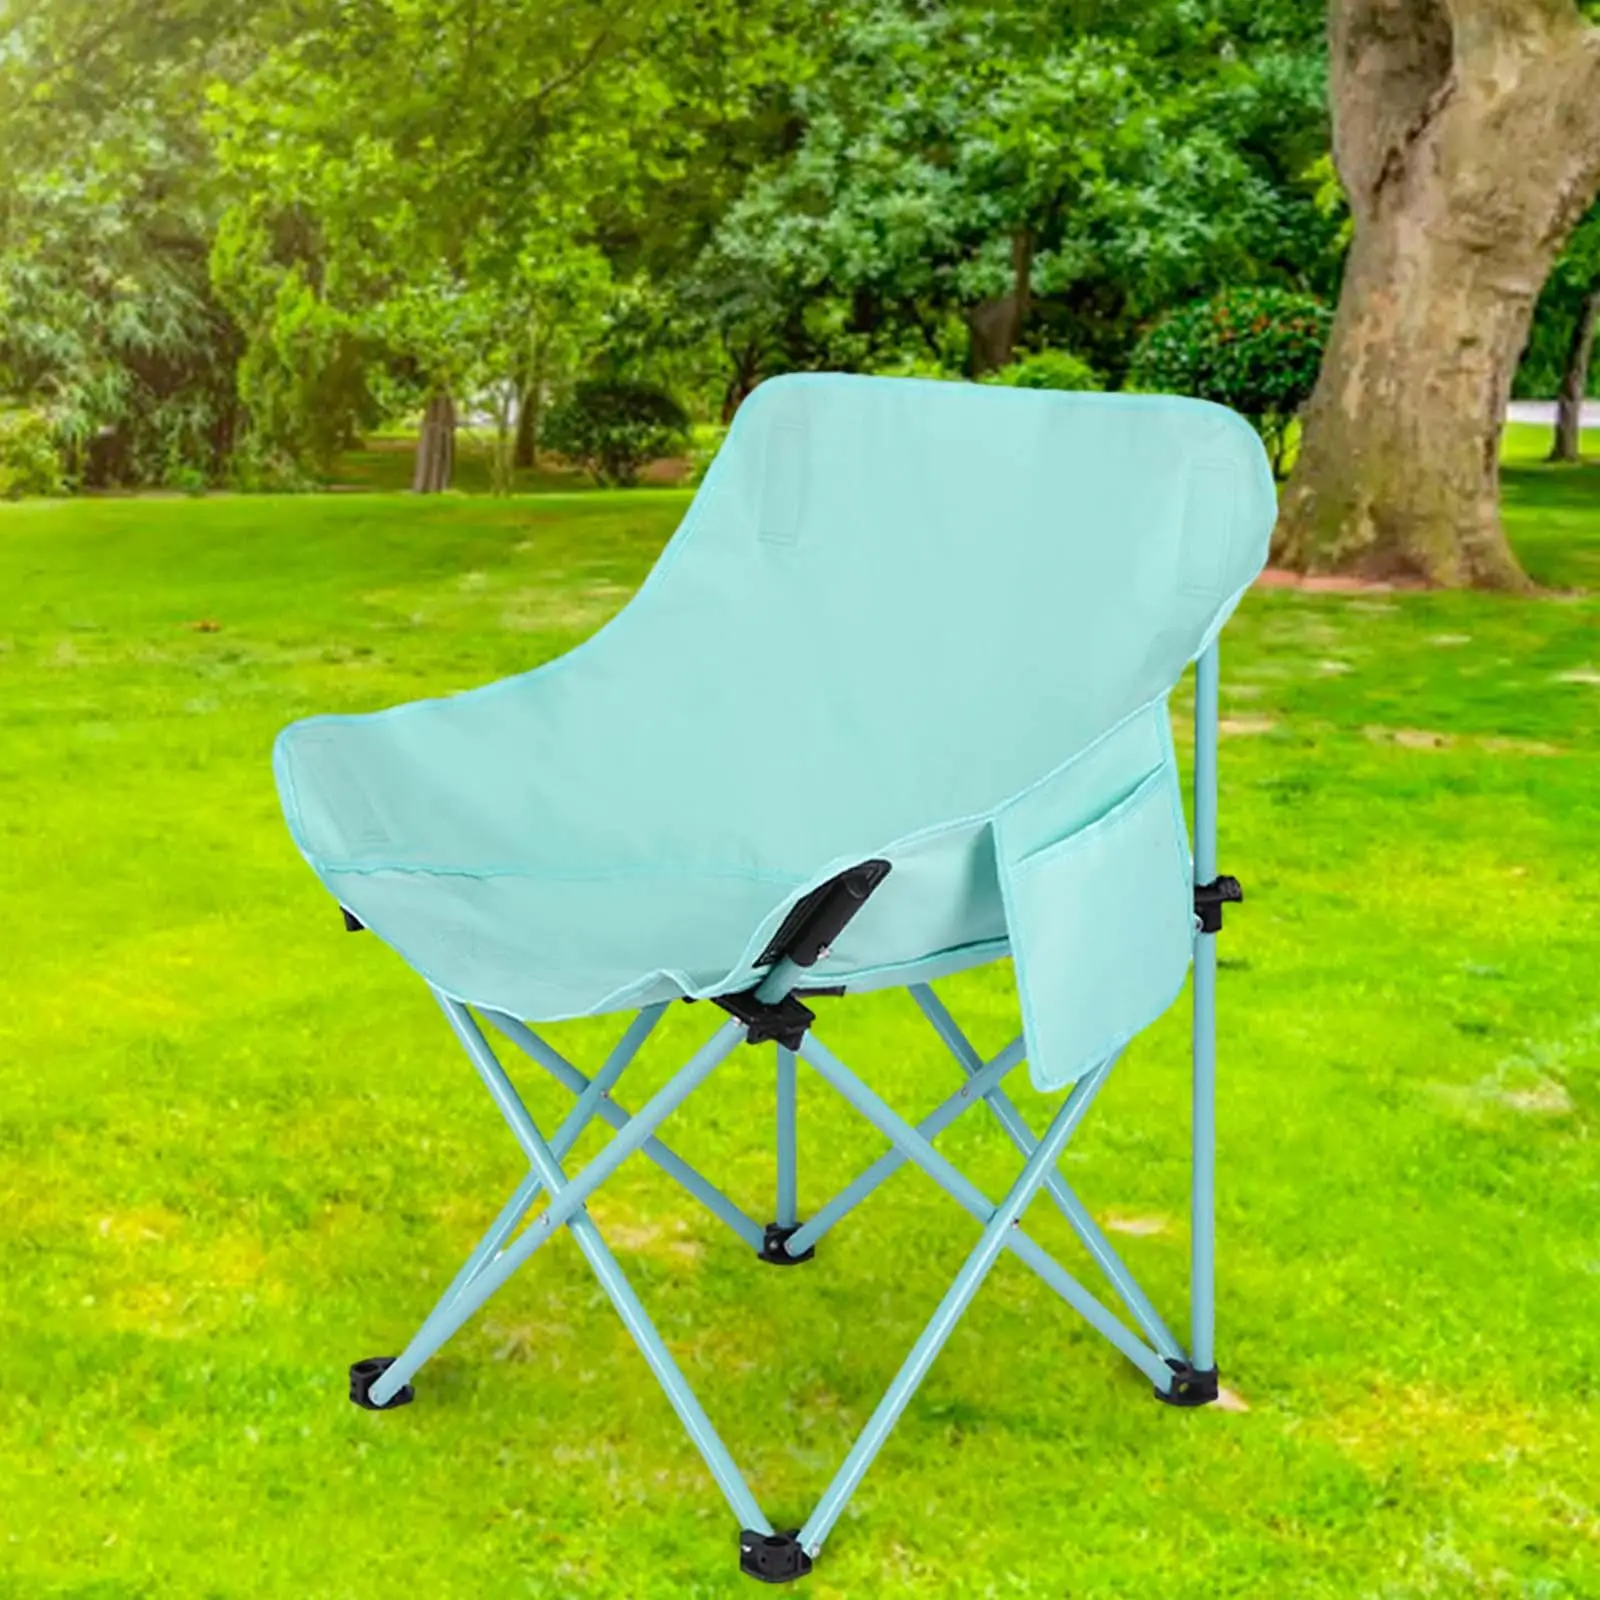 Folding Camping Chair with Side Pocket Beach Chair for Garden BBQ